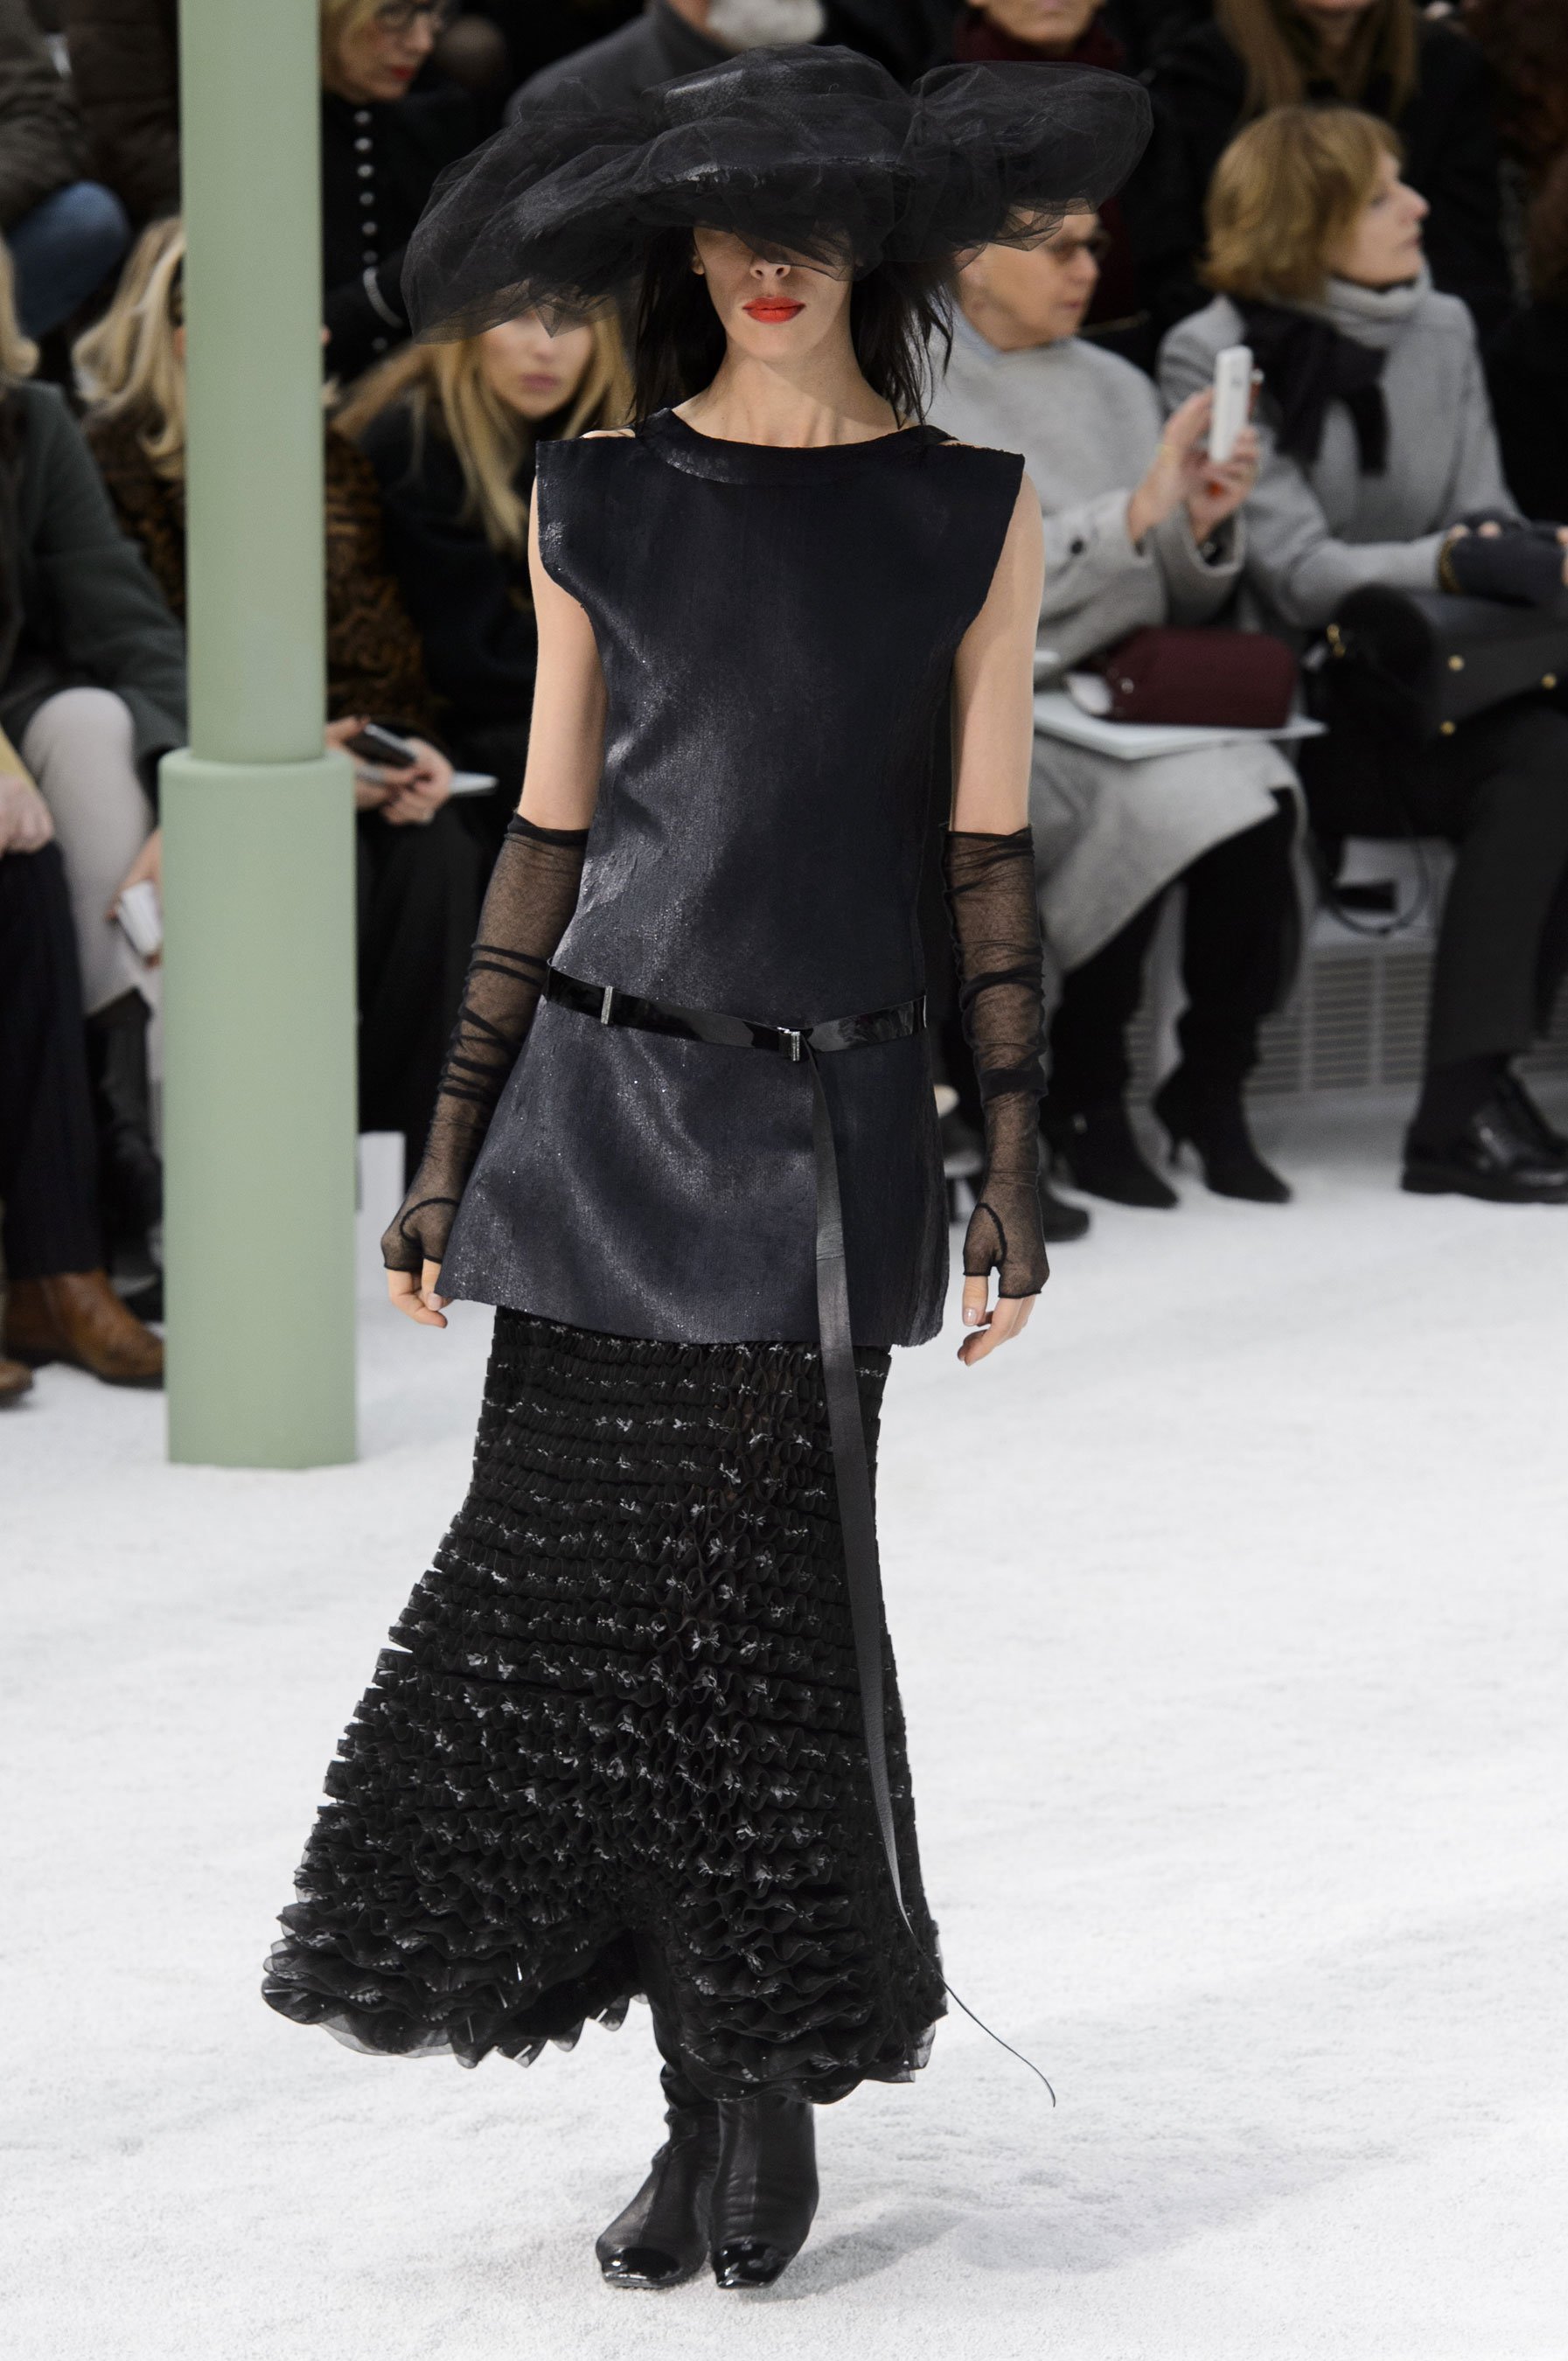 chanel haute couture spring 2015 pfw 55 jamie